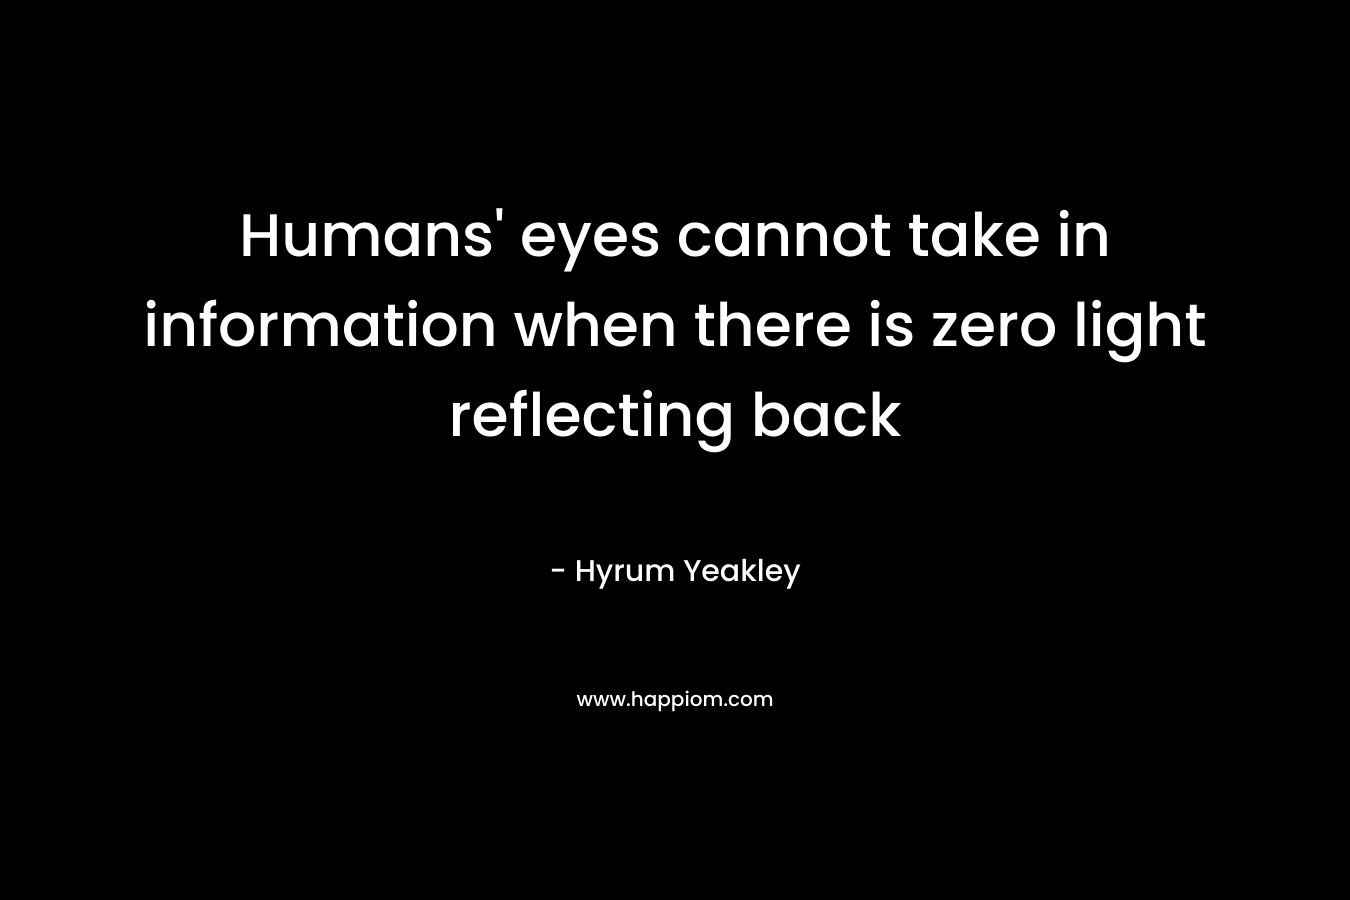 Humans' eyes cannot take in information when there is zero light reflecting back